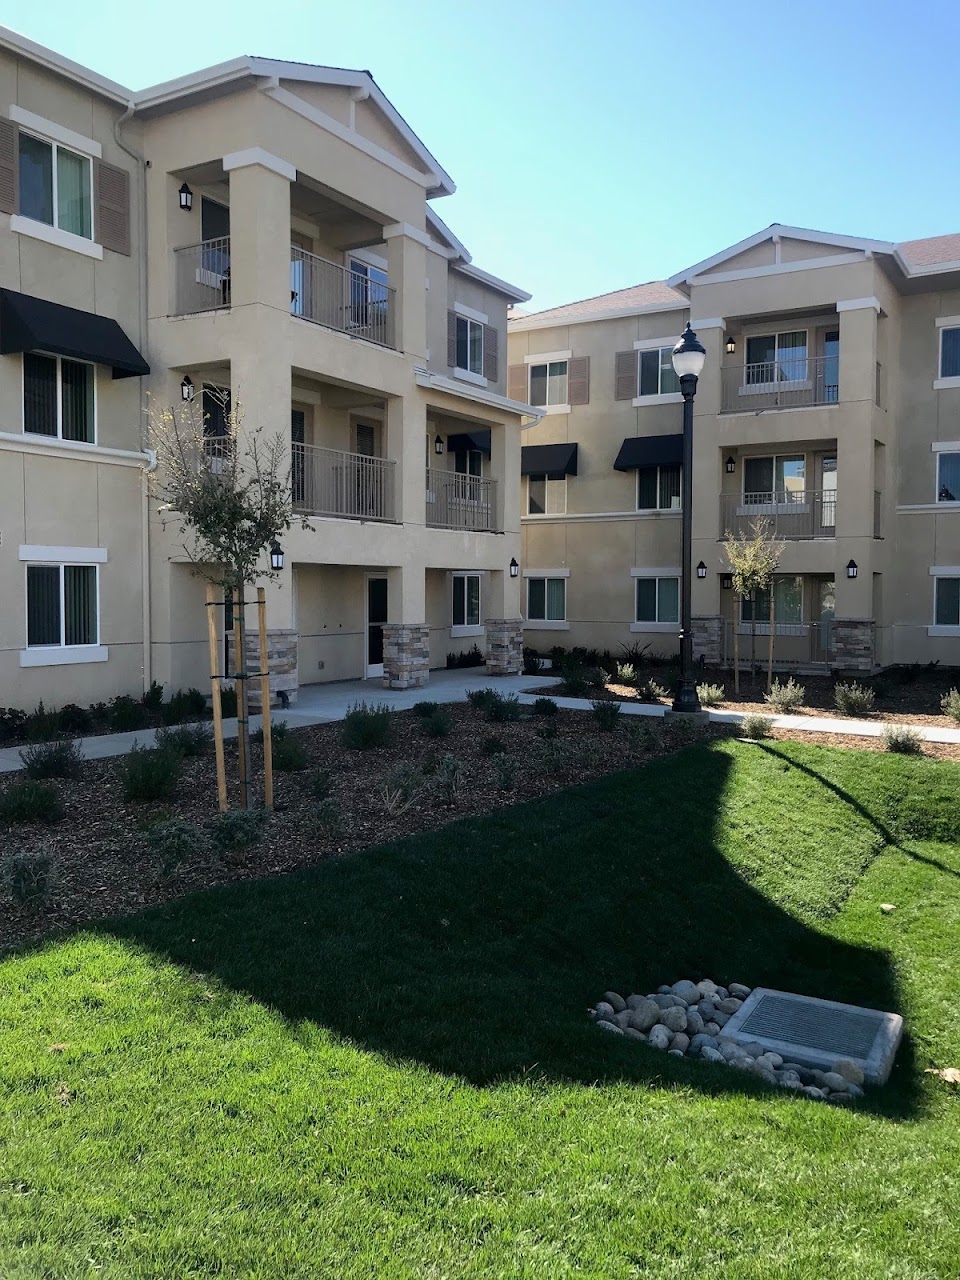 Photo of OAKLEY APTS. Affordable housing located at 53 CAROL LN OAKLEY, CA 94561